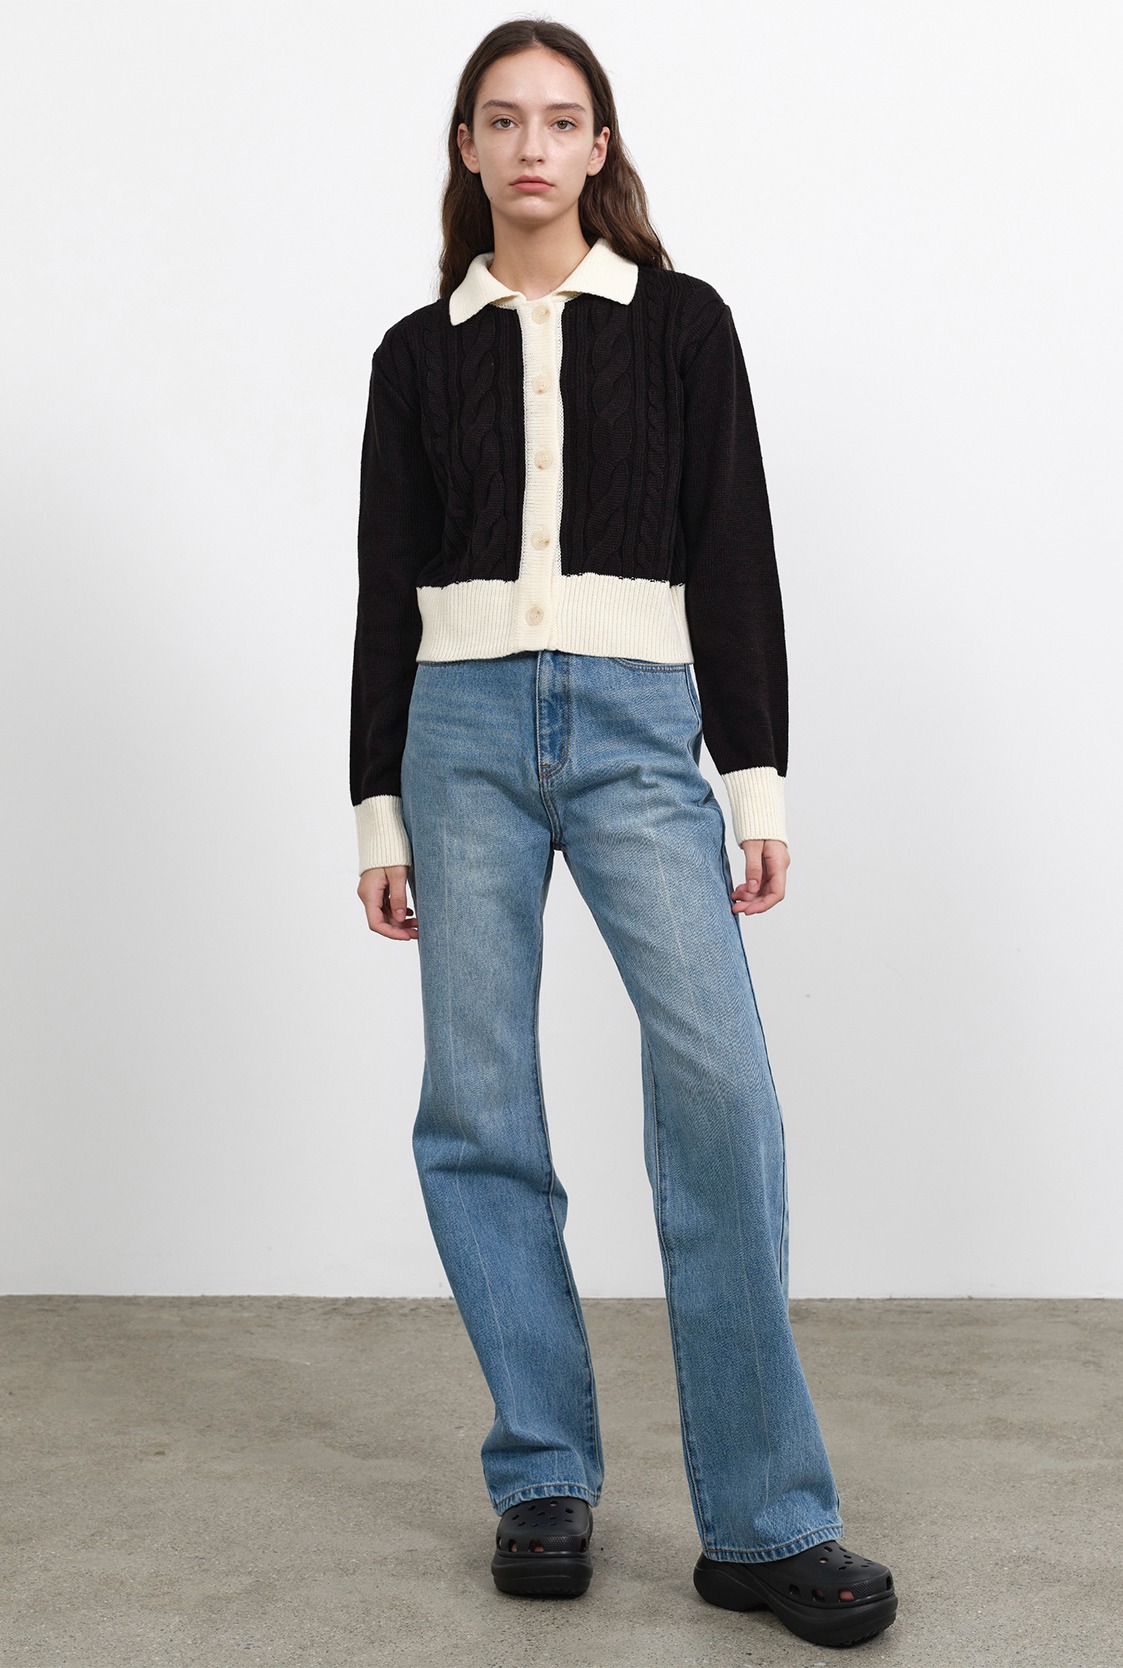 R CONTRAST CABLE KNIT CARDIGAN_BLACK